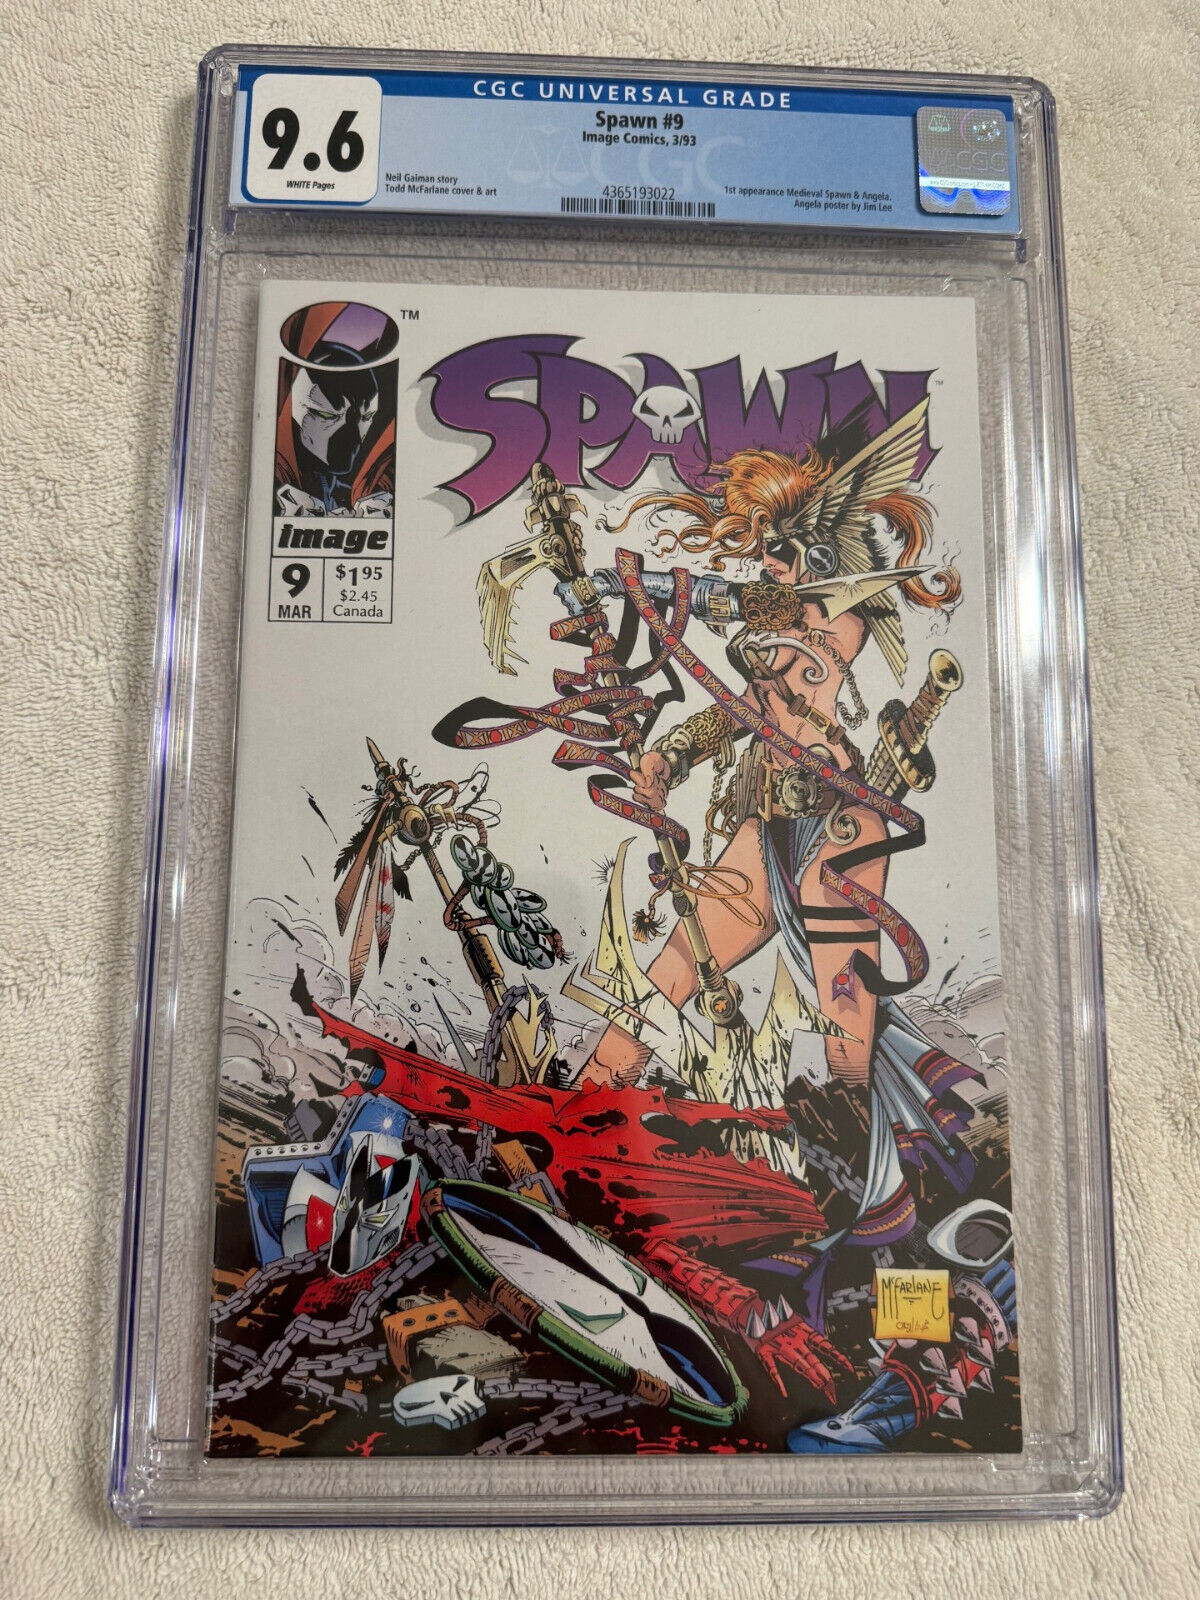 Spawn #9 - CGC 9.6 - White Pages - 1st app. Medieval Spawn & Angela - Image 1993